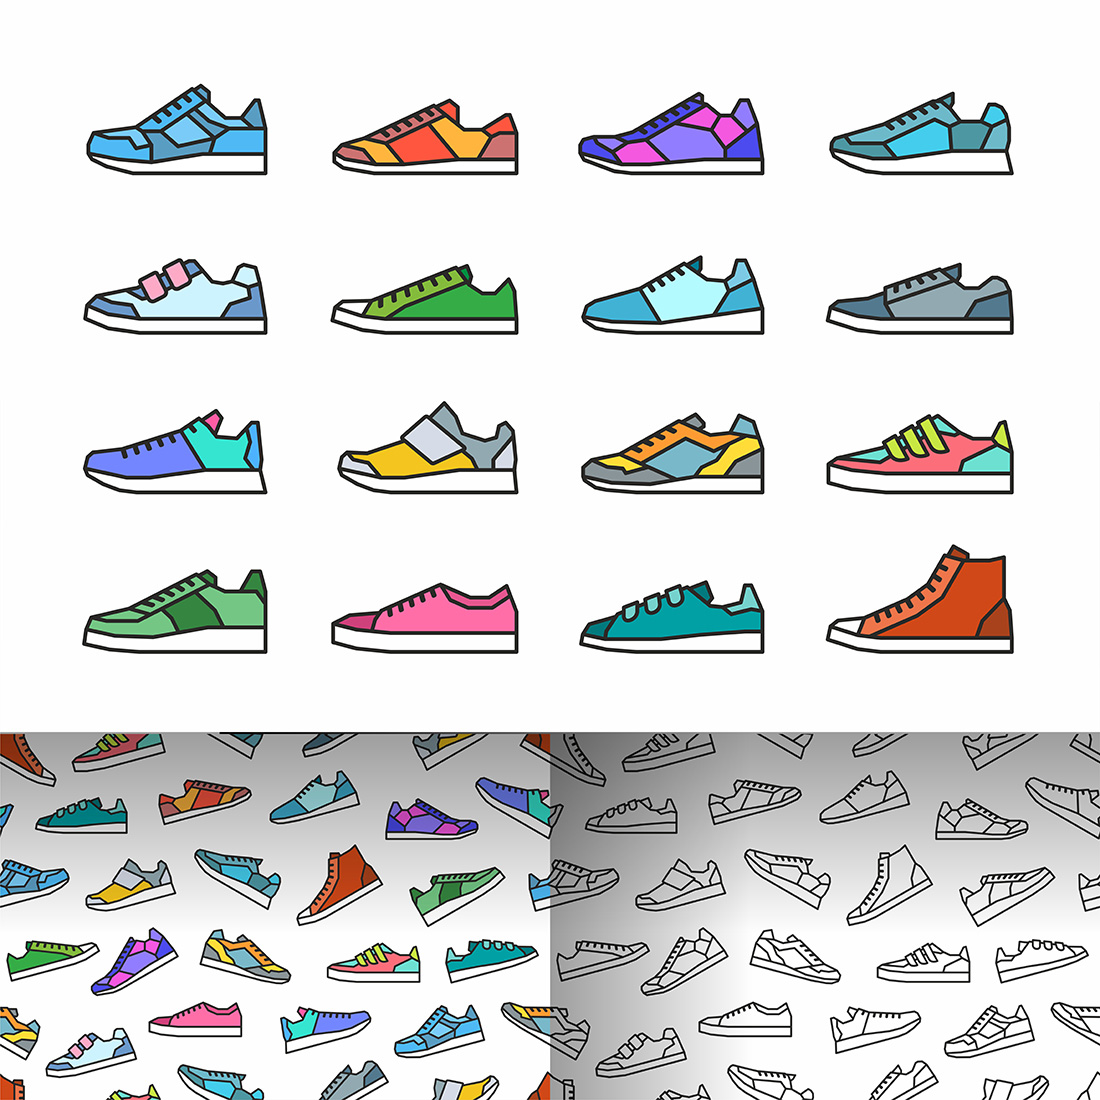 Sneakers Set & Patterns cover image.